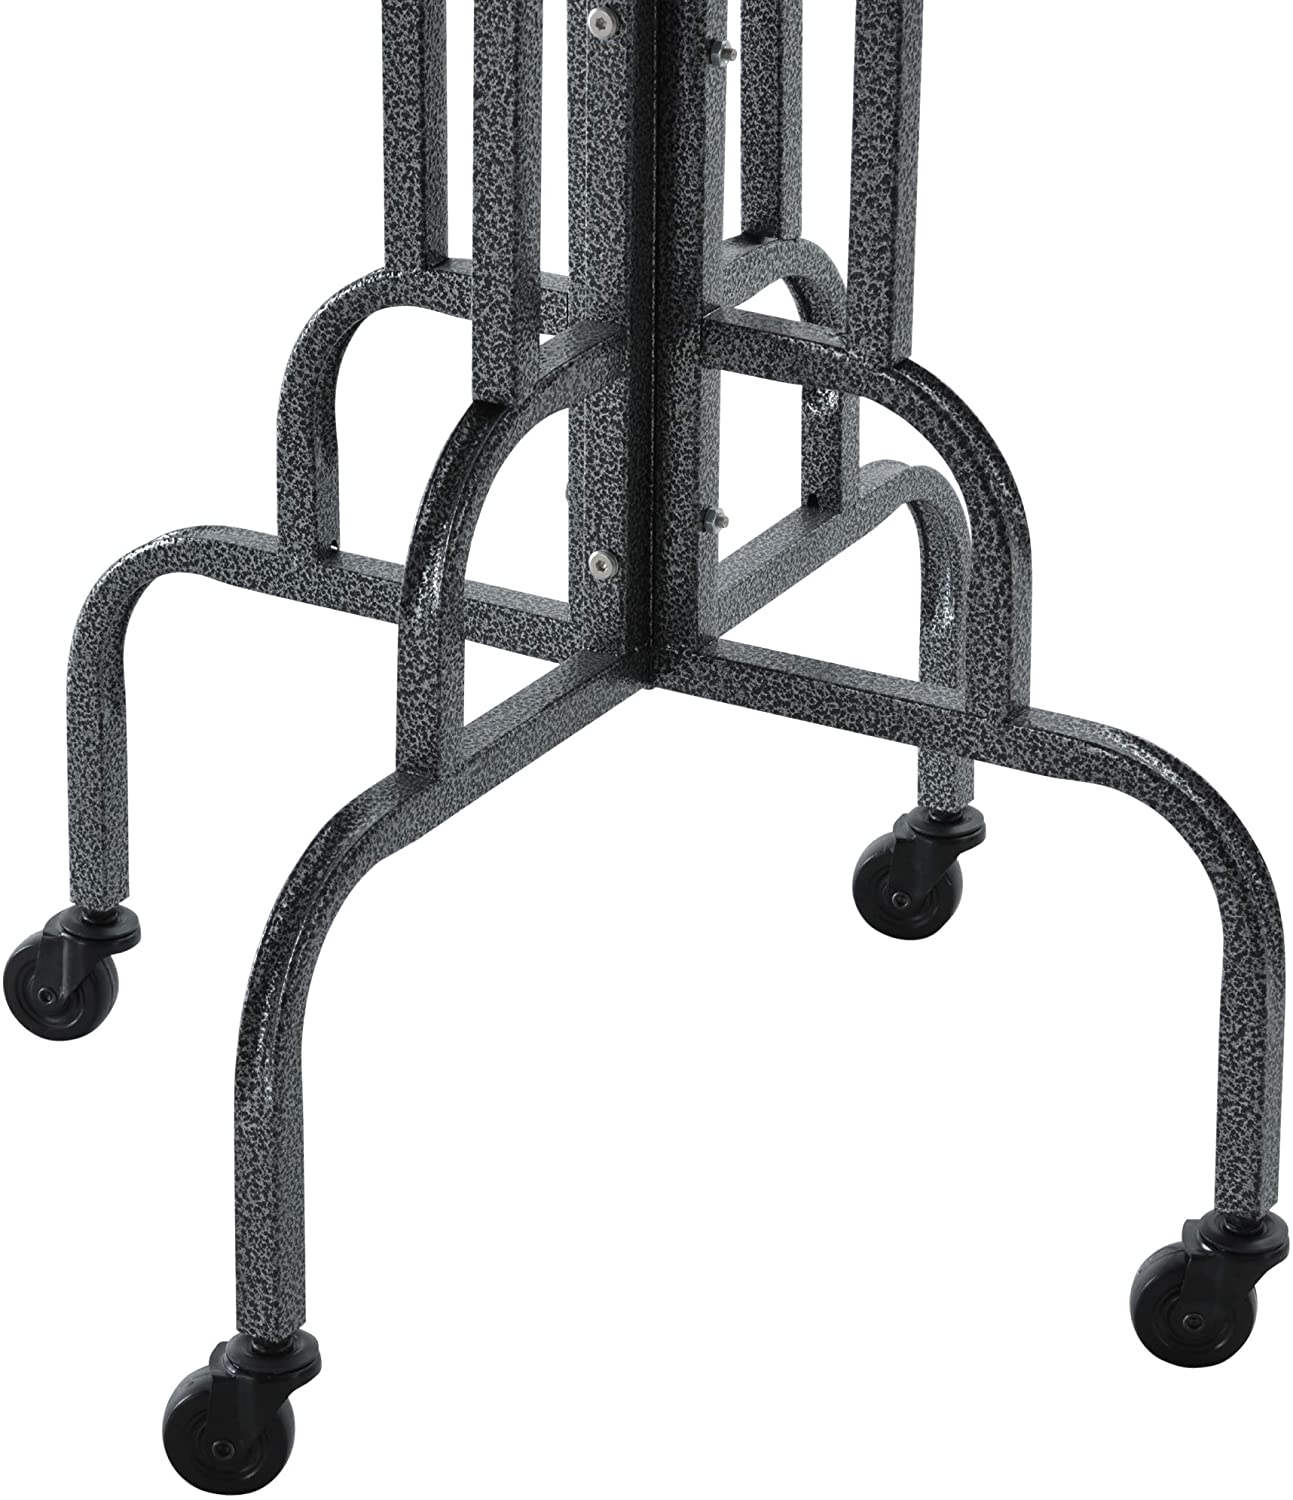 Pawhut Rolling Bird Perch Play Stand with Universal Wheels, Wooden Perch Ladders, & Stainless Steel Feeding Cups, Grey